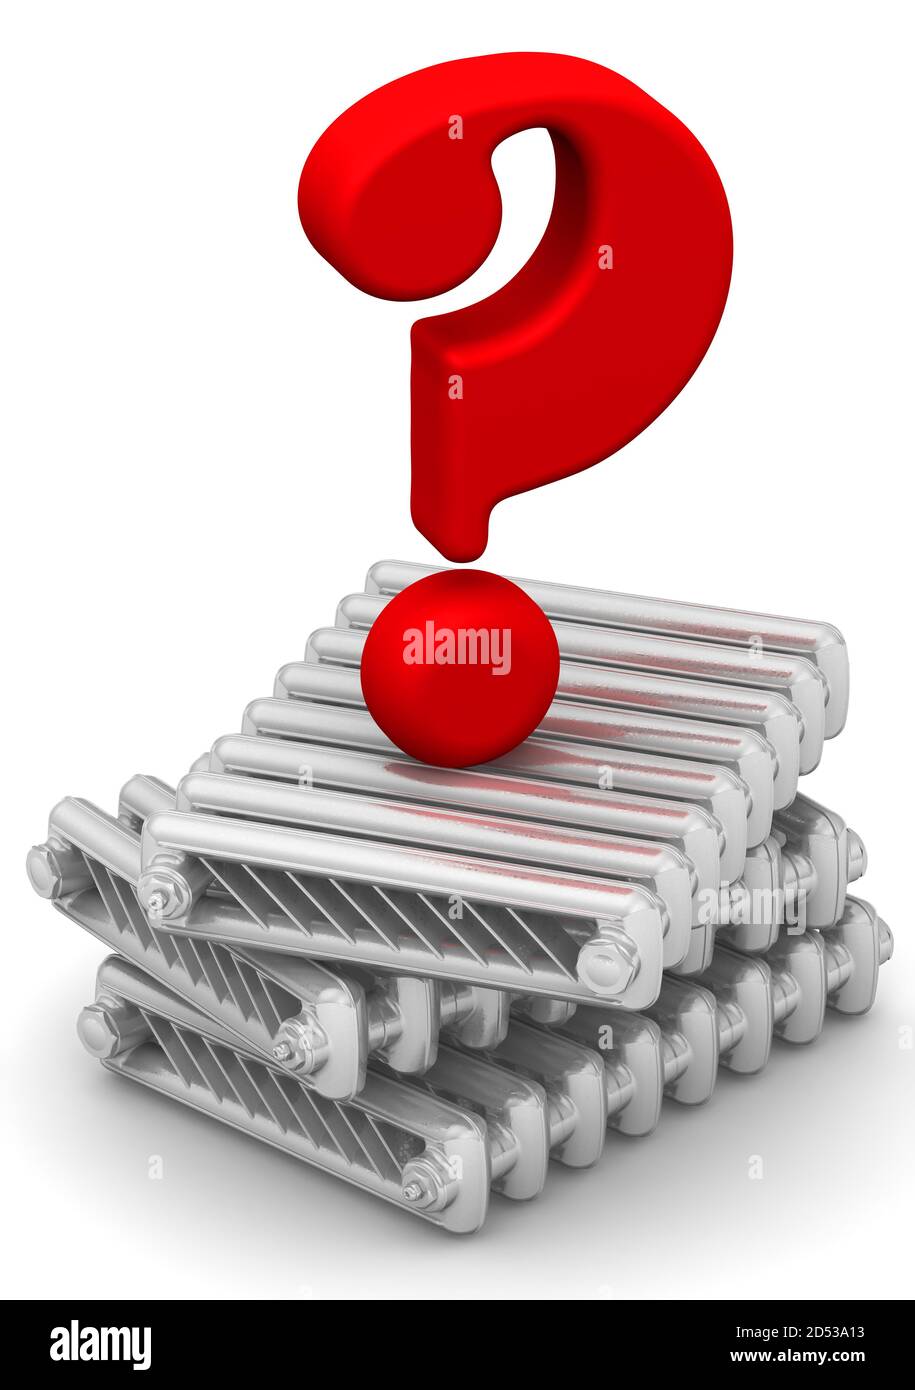 The problem of choosing heating radiators.Stacked sections of cast iron heating radiators and one red question mark on a white surface. 3D illustration Stock Photo